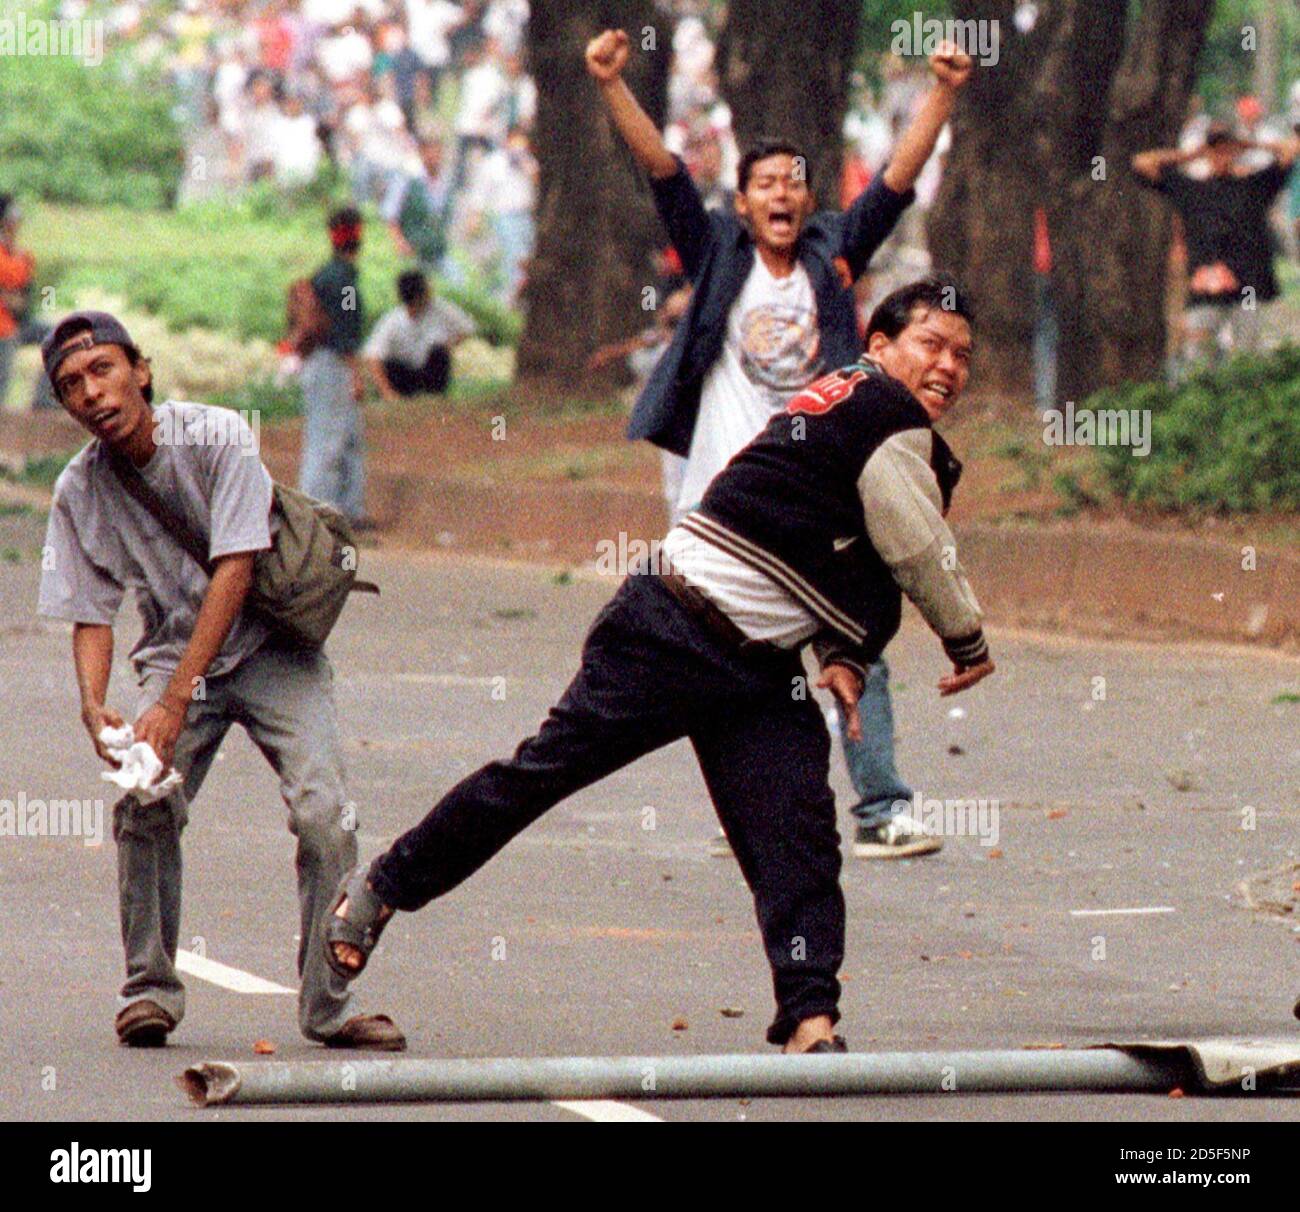 Indonesian anti-government protestors hurl stones at police forces on Jakarta's main street November 13. Troops fired rubber bullets, teargas and bursts from water cannon to disperse thousands of students and anti-government protesters demanding more political reform. Five people were killed and scores have been injured while the People's Consultative Assembly (MPR) was holding the last day of a four-day session to decide on the country's political future. Stock Photo